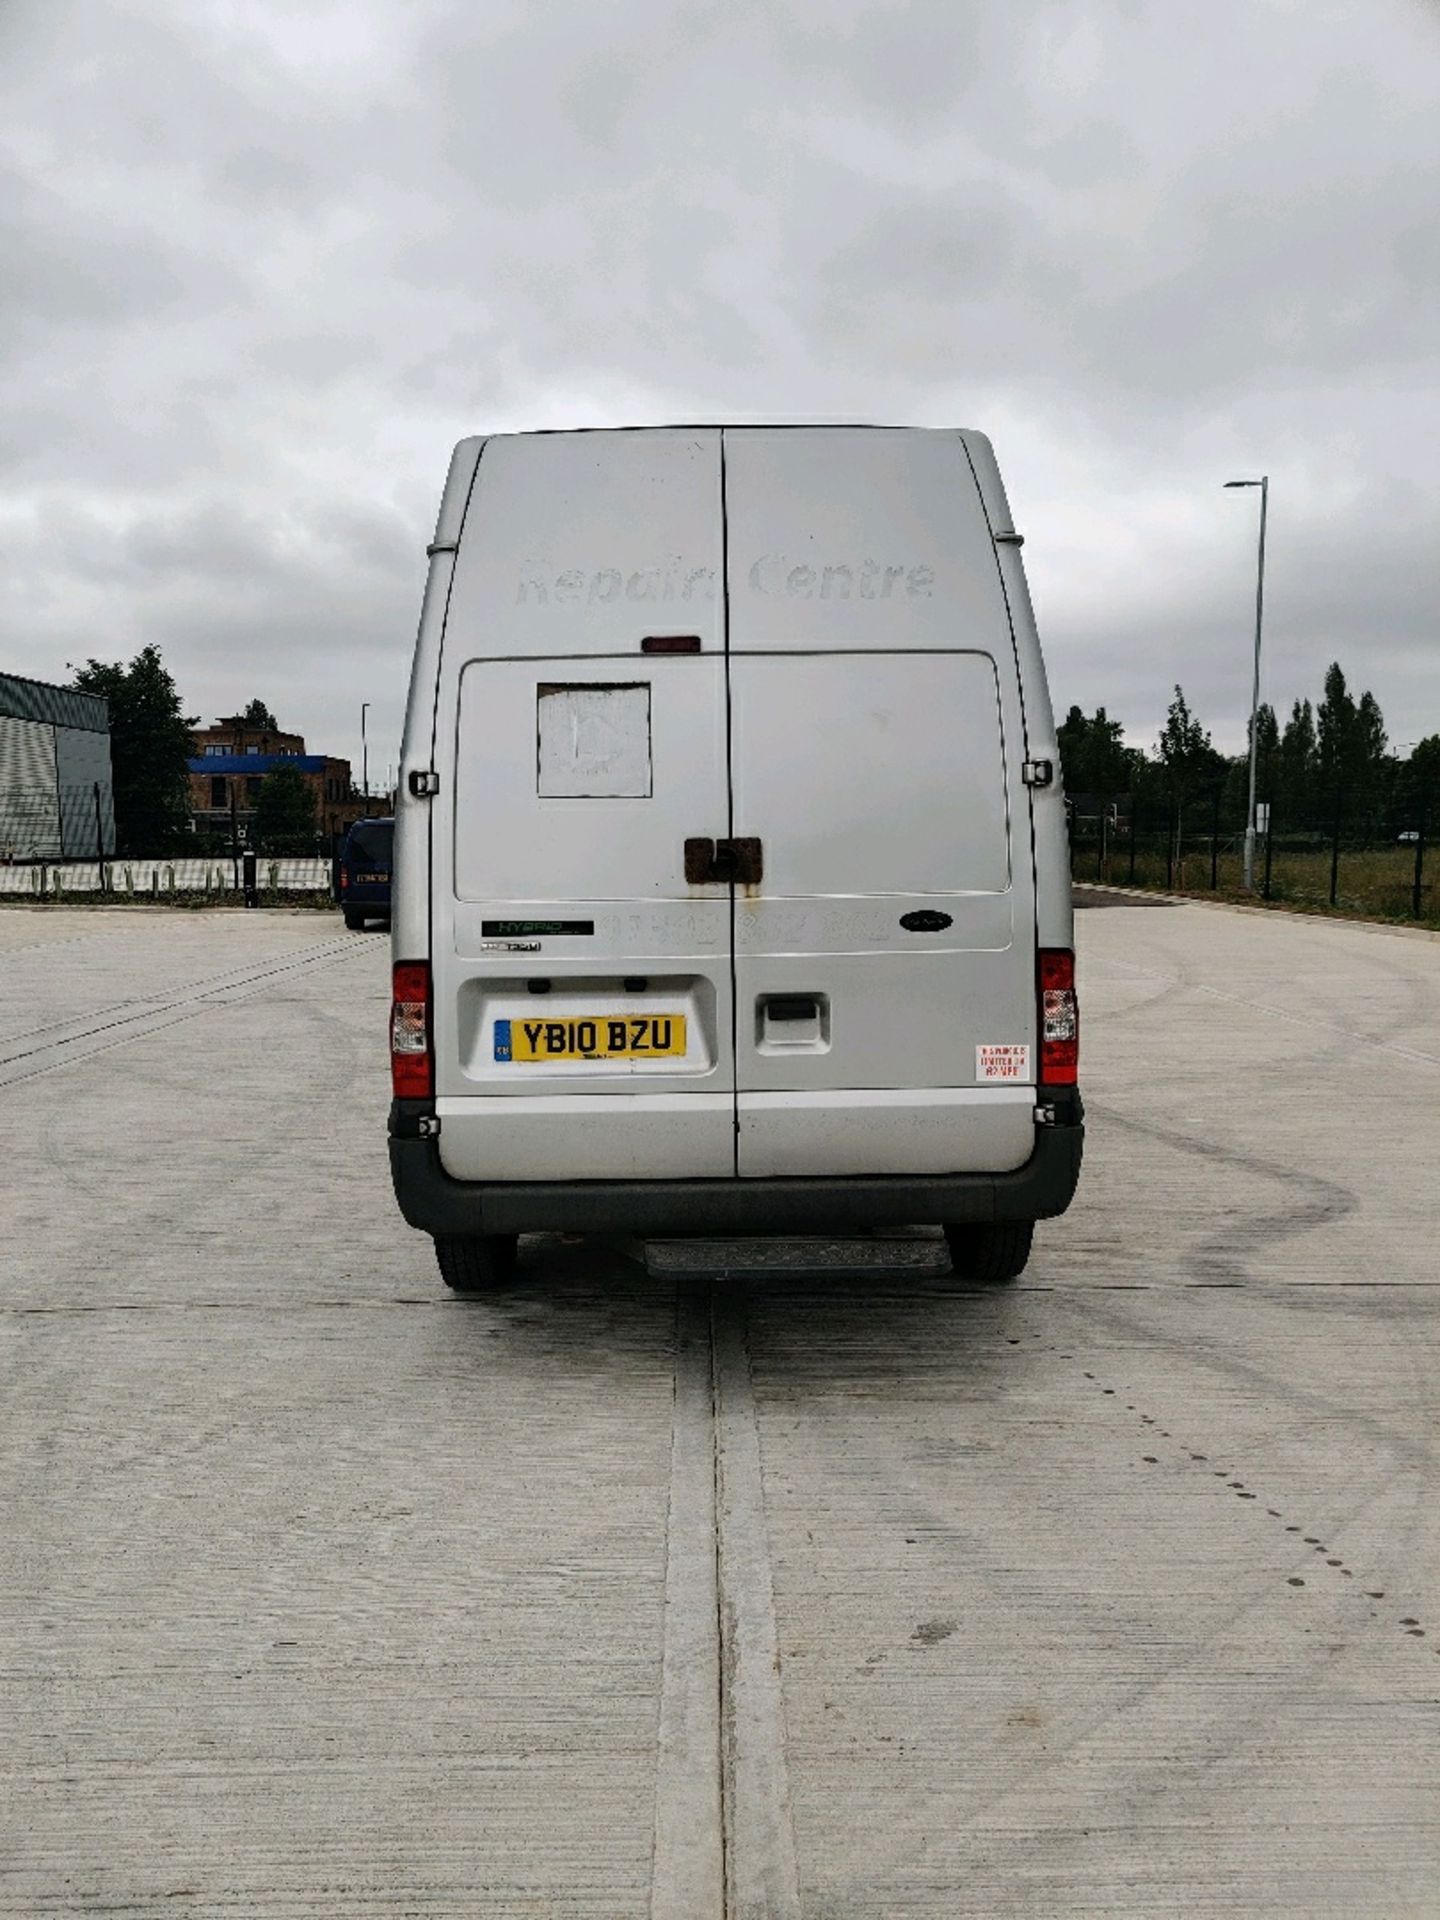 ENTRY DIRECT FROM LOCAL AUTHORITY Ford transit YB10BZU - Image 3 of 20